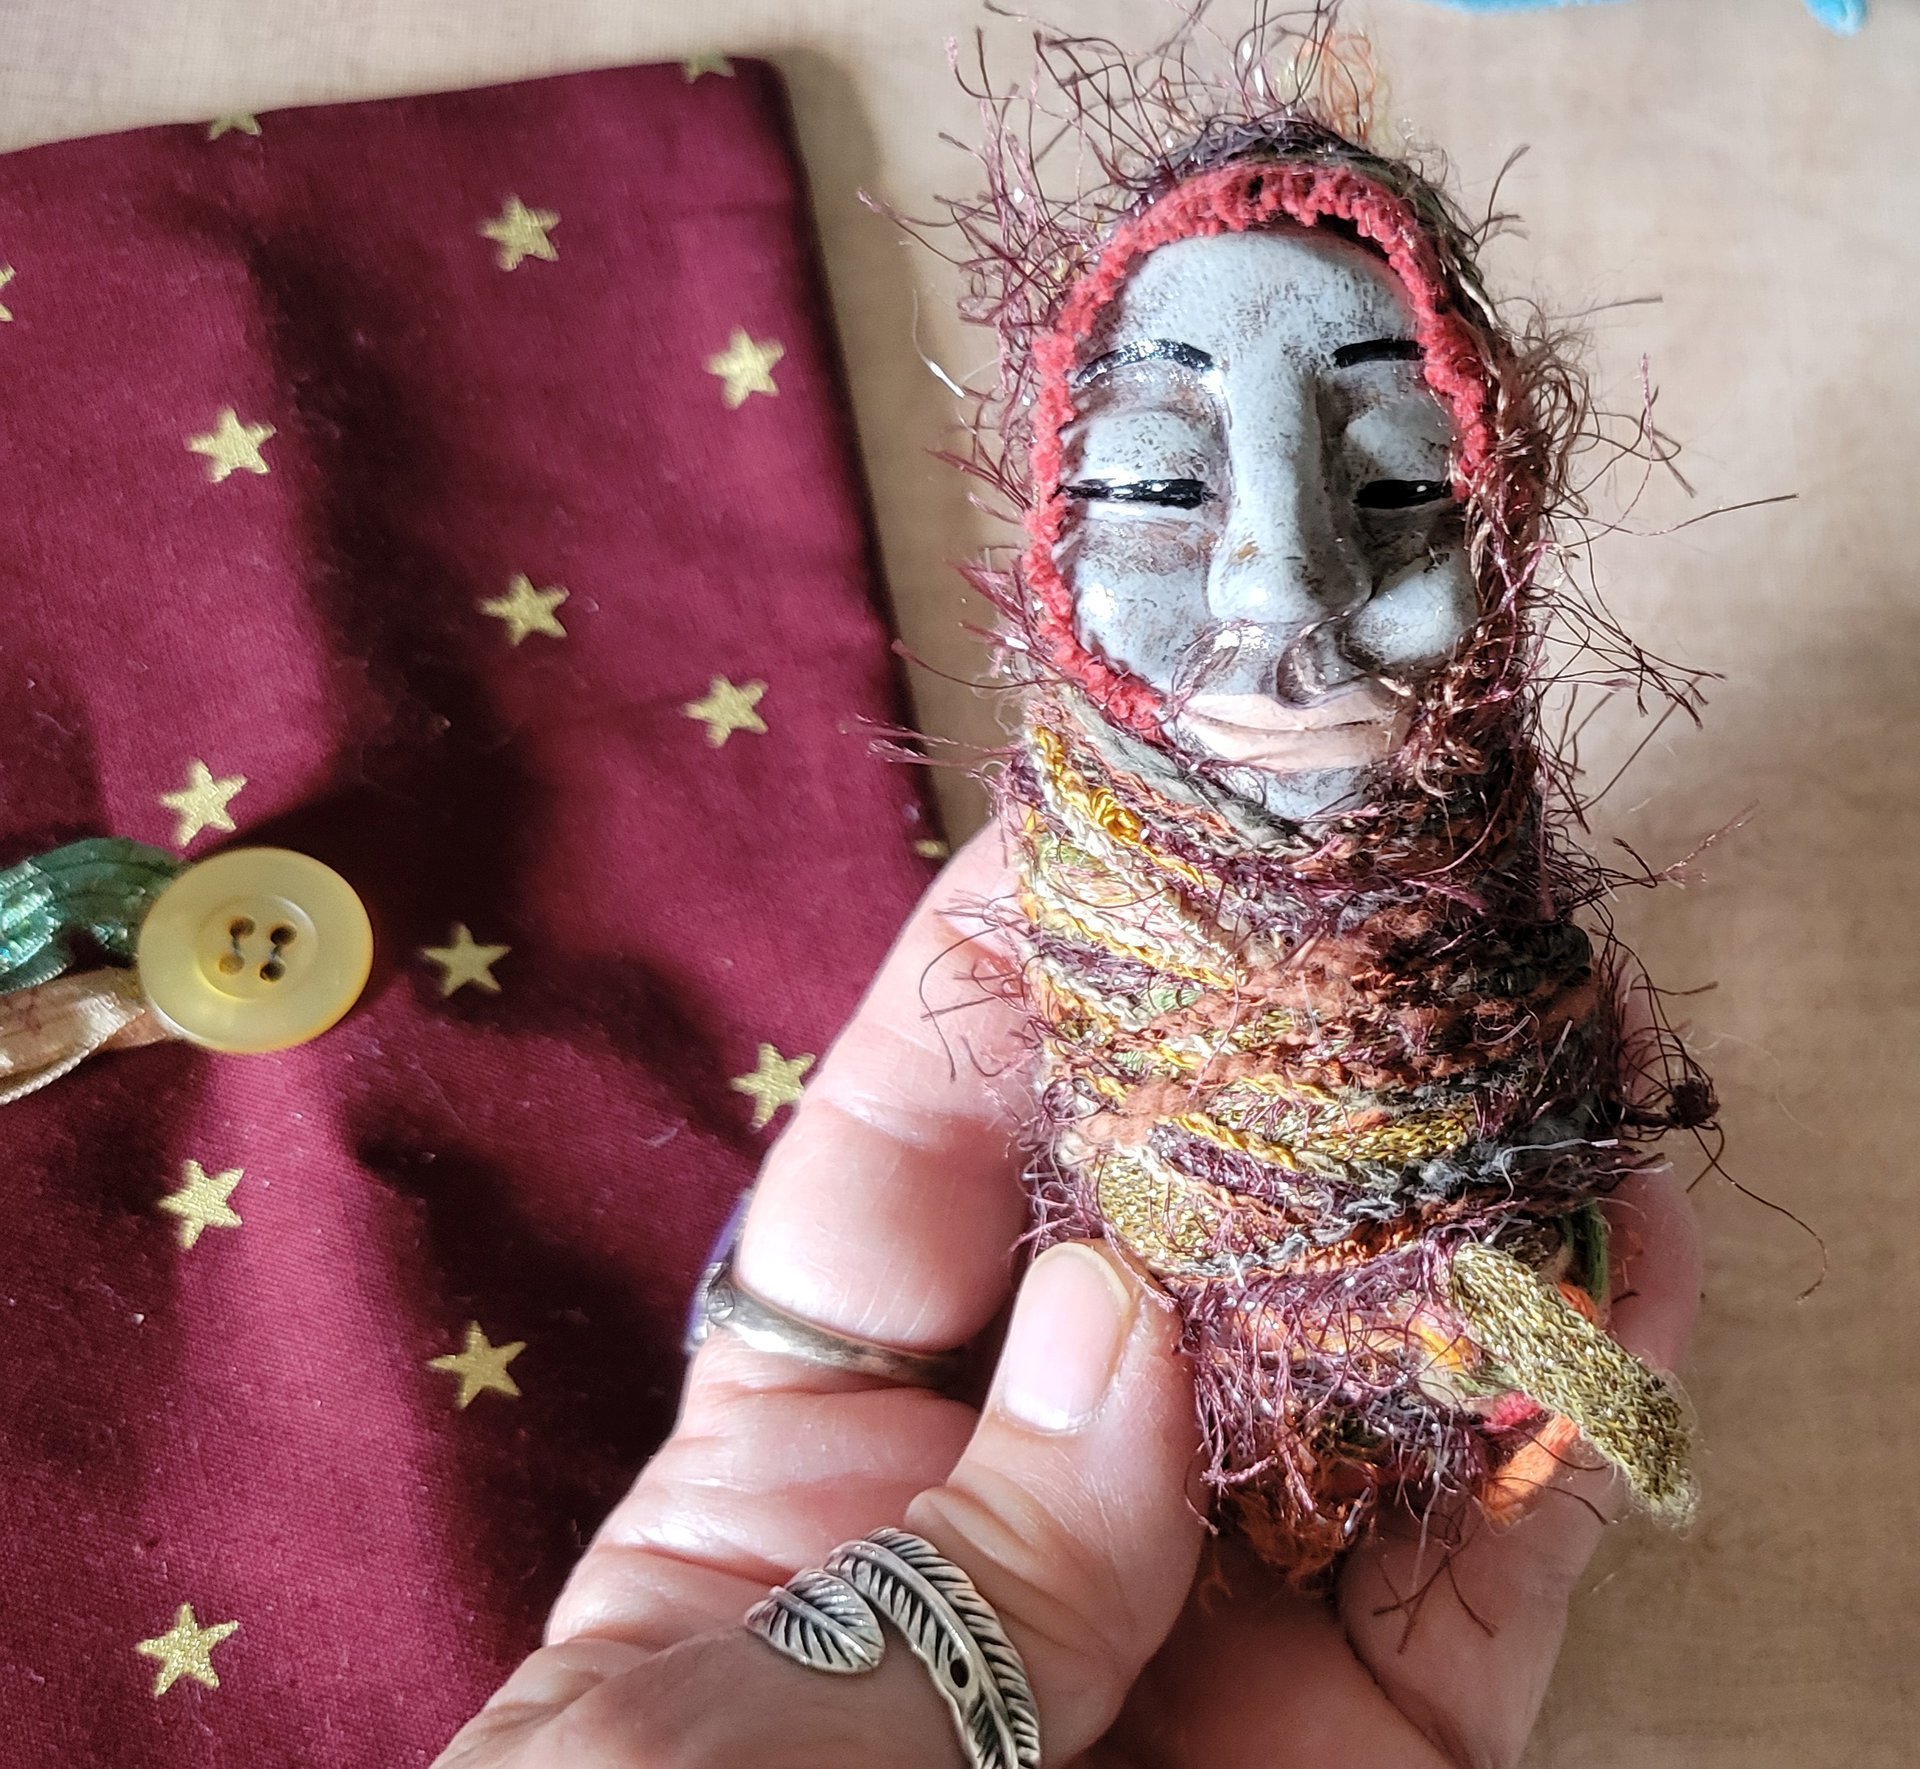 Conjuring Crone - OOAK Clay Sculpted Poppet with Fabric Pouch